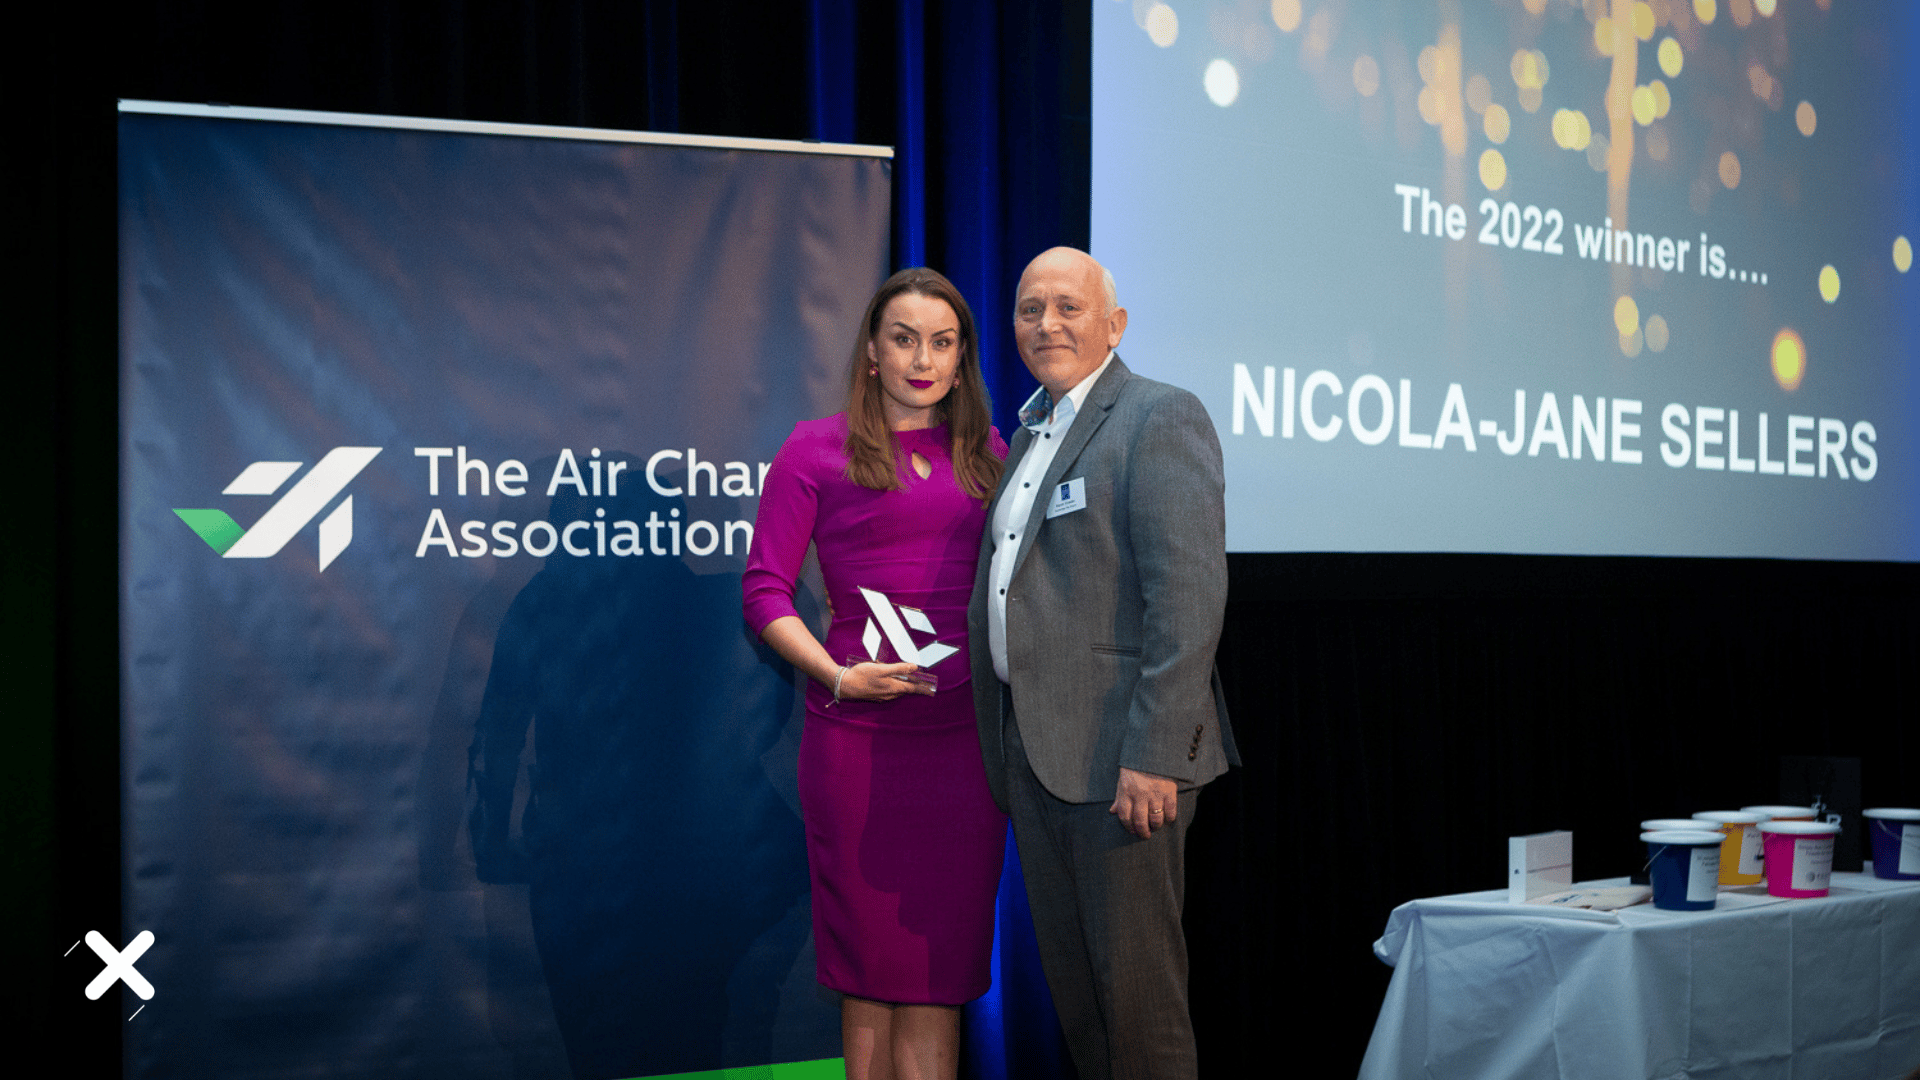 Sir Michael Marshall Award for Sustainability in Aviation 